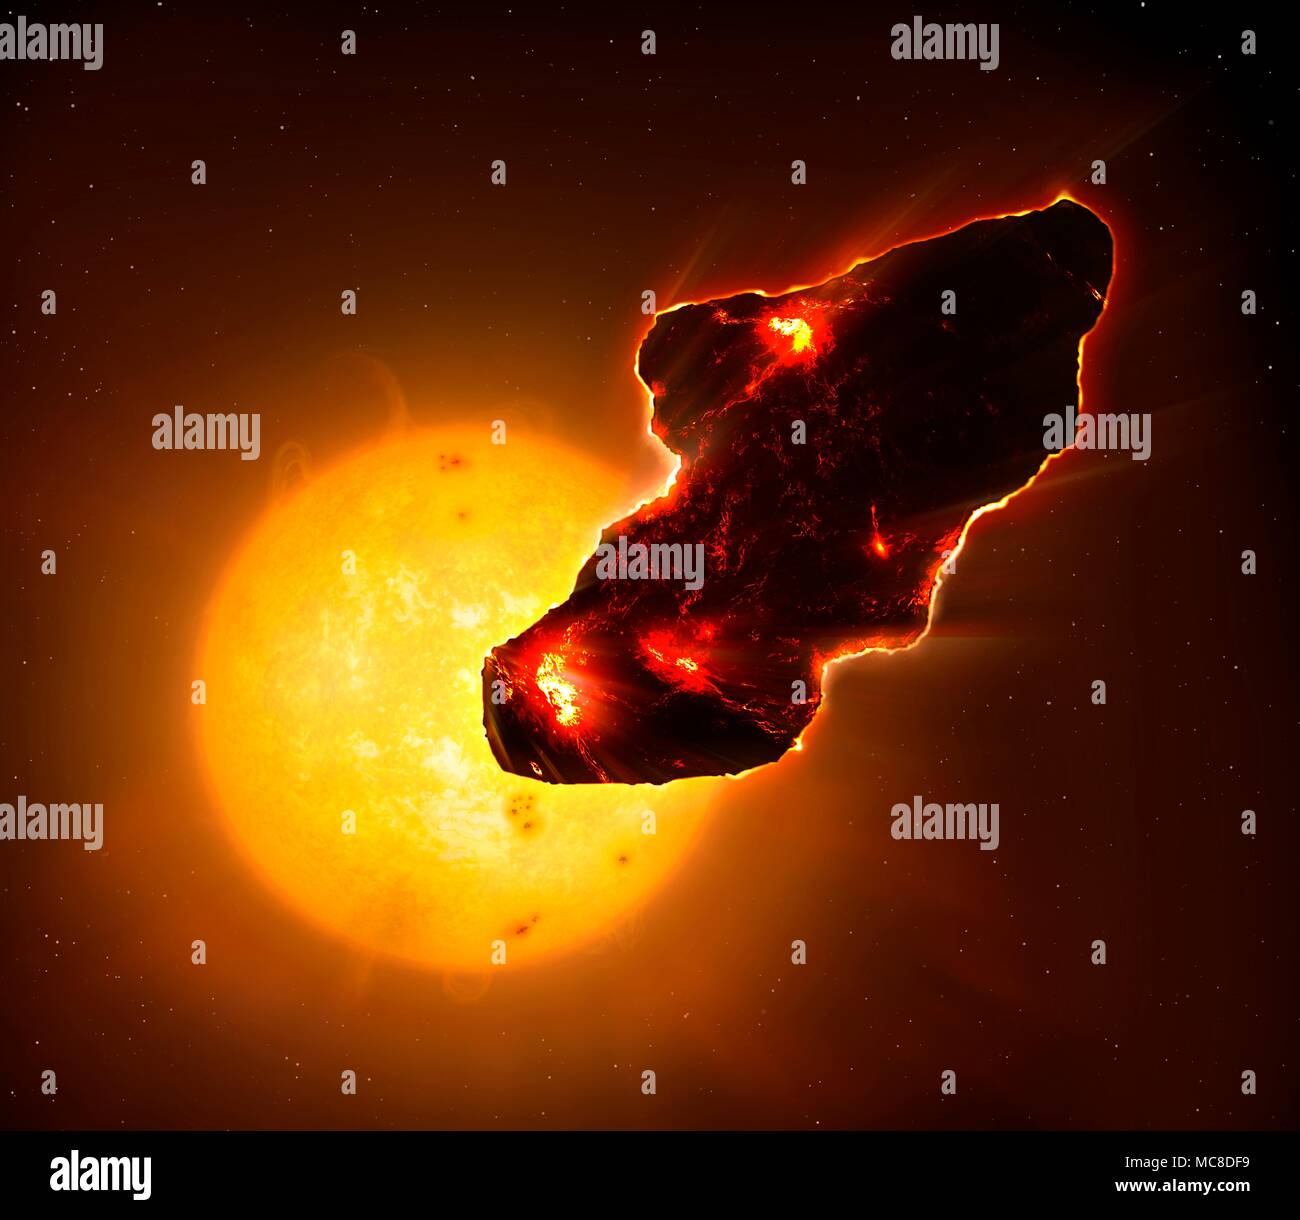 Illustration of an asteroid approaching the Sun, and heating up as a result. Stock Photo